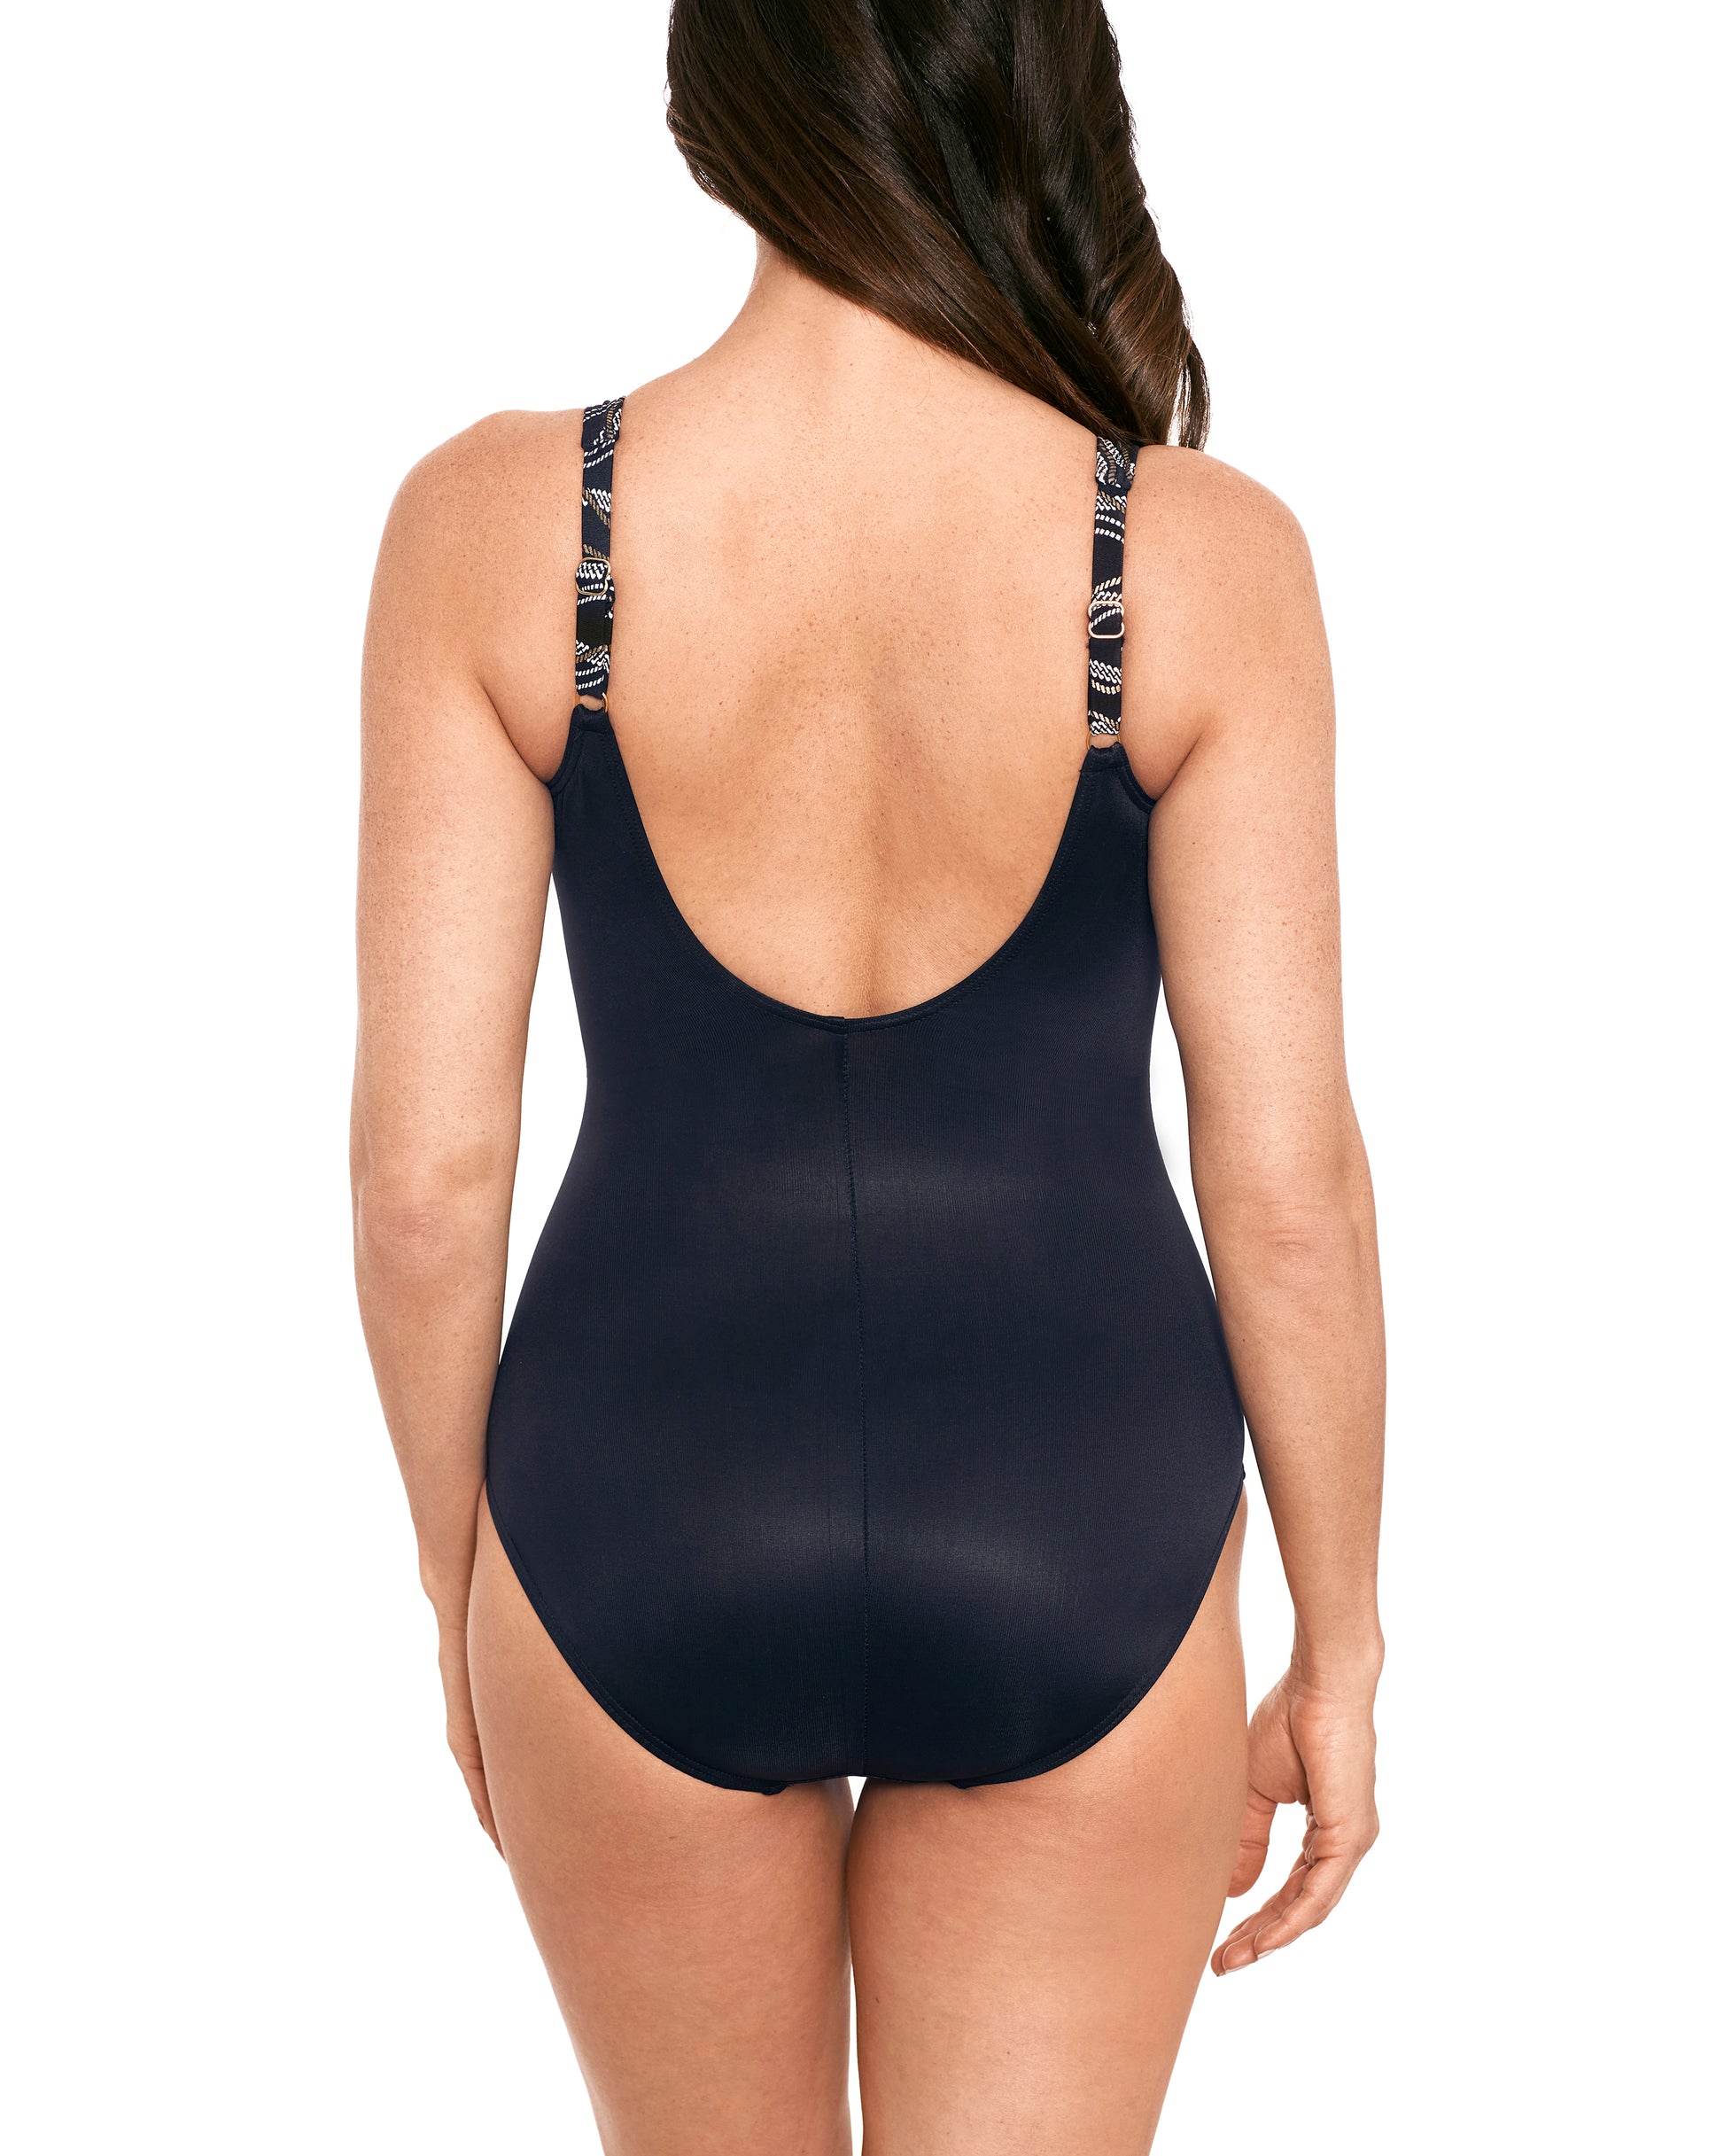 2023 Miraclesuit Linked In Oceanus DD Cup One Piece - 6555288Dd - Blum's Swimwear & Intimate Apparel, Patchogue, Long Island, Buffalo, New York, Year Round Swimwear, Angela’s Bra Boutique, Farmingdale, Swimsuit, Ashley's Swimwear & Lingerie, Ashley's of Buffalo, Lovely Swimwear & Intimate Apparel, Full-Figure Swimwear, Bathing Suit, Full Bust, Full FigureBras, Plus Size Swimwear, Tummy Control, Everything But Water, Bare Necessities, Kohl's  Macy's, Target, Walmart